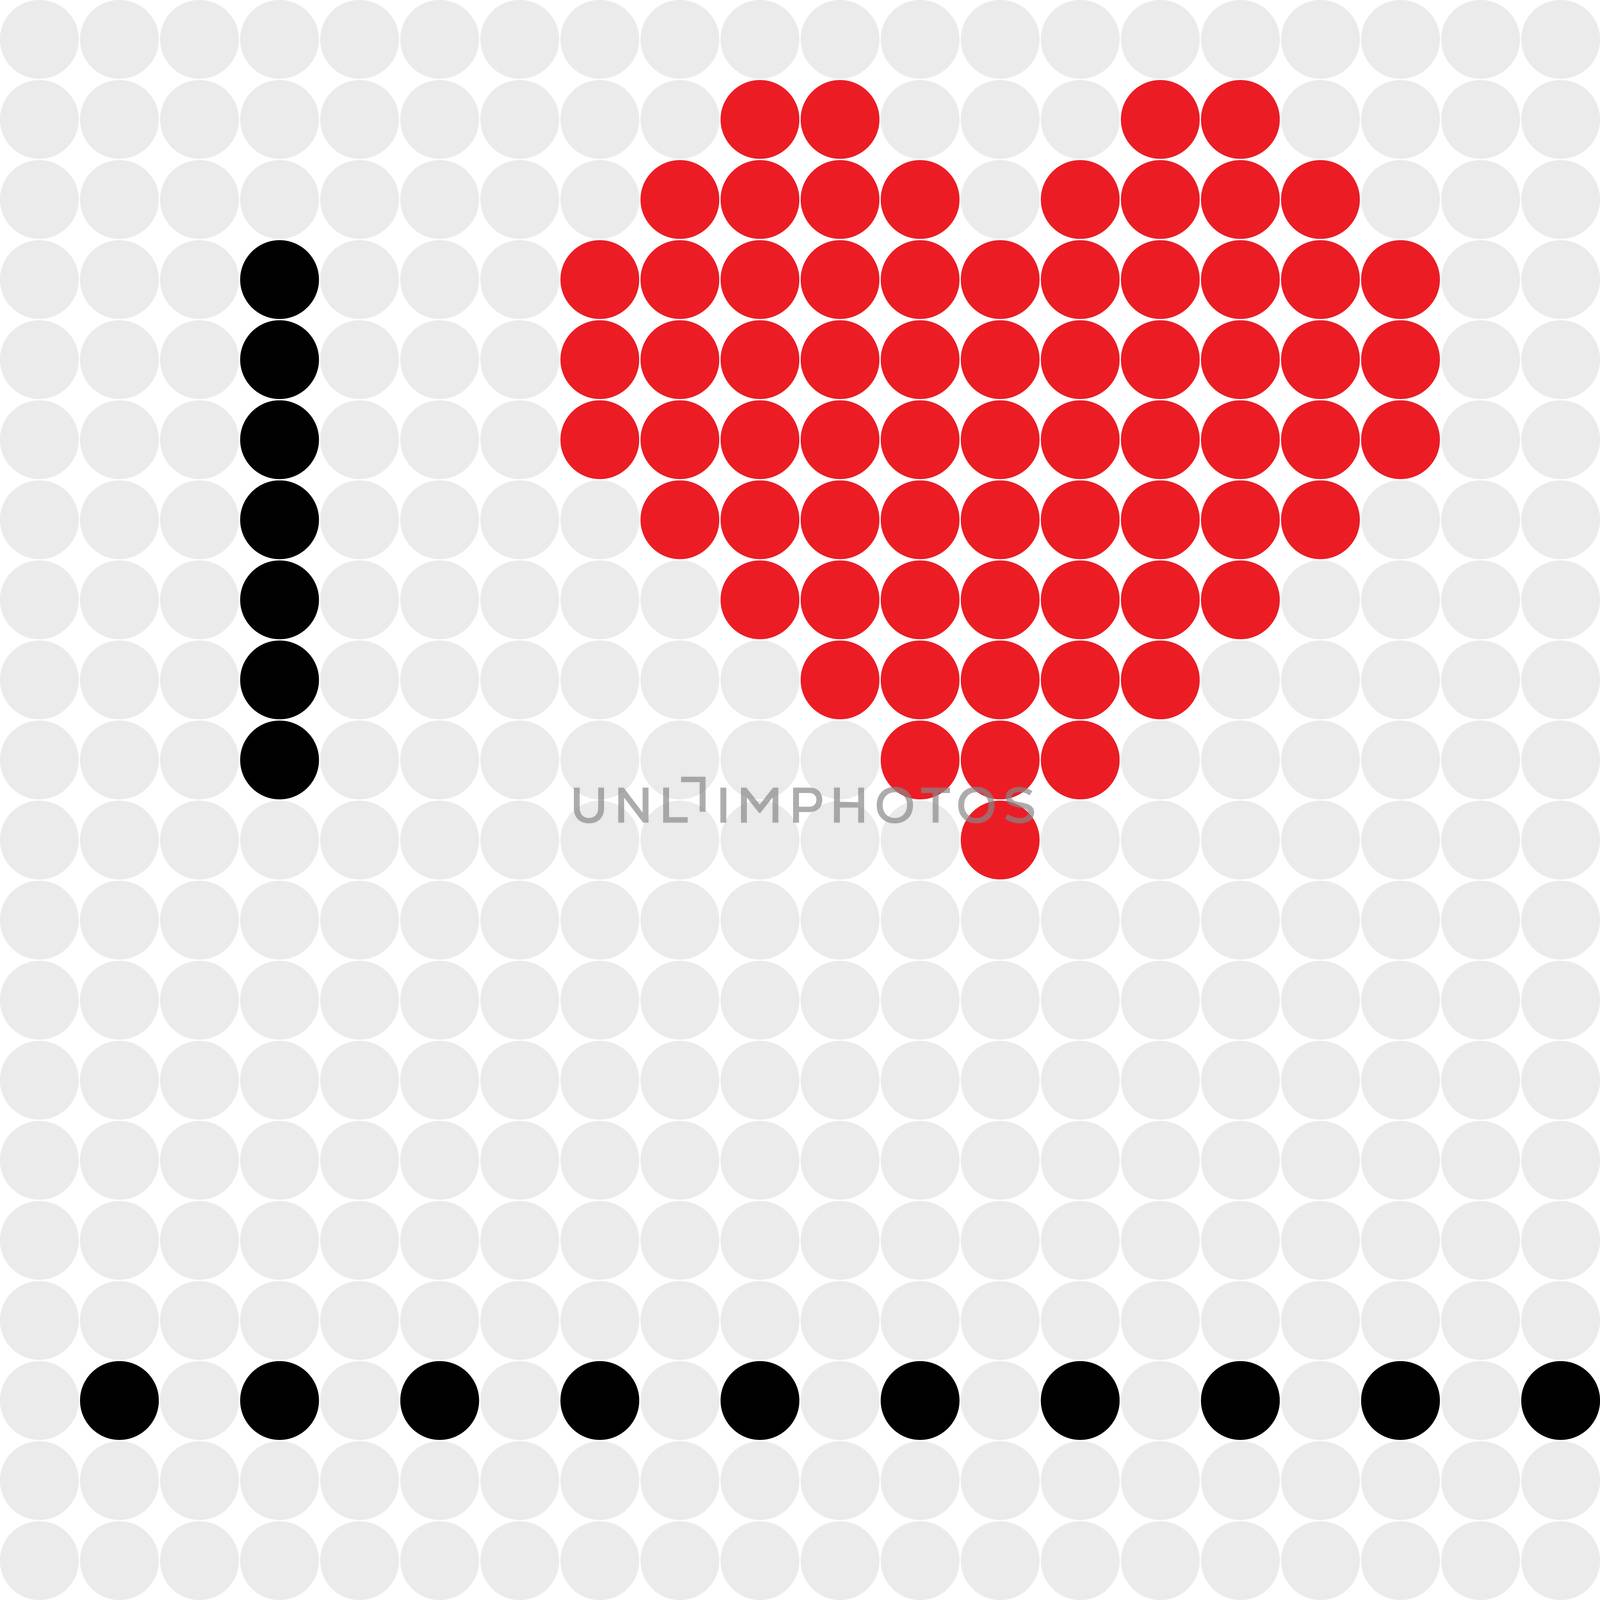 I love, fill in the blanks pixel illustration of a scoreboard composition with digital text and heart shape made of dots